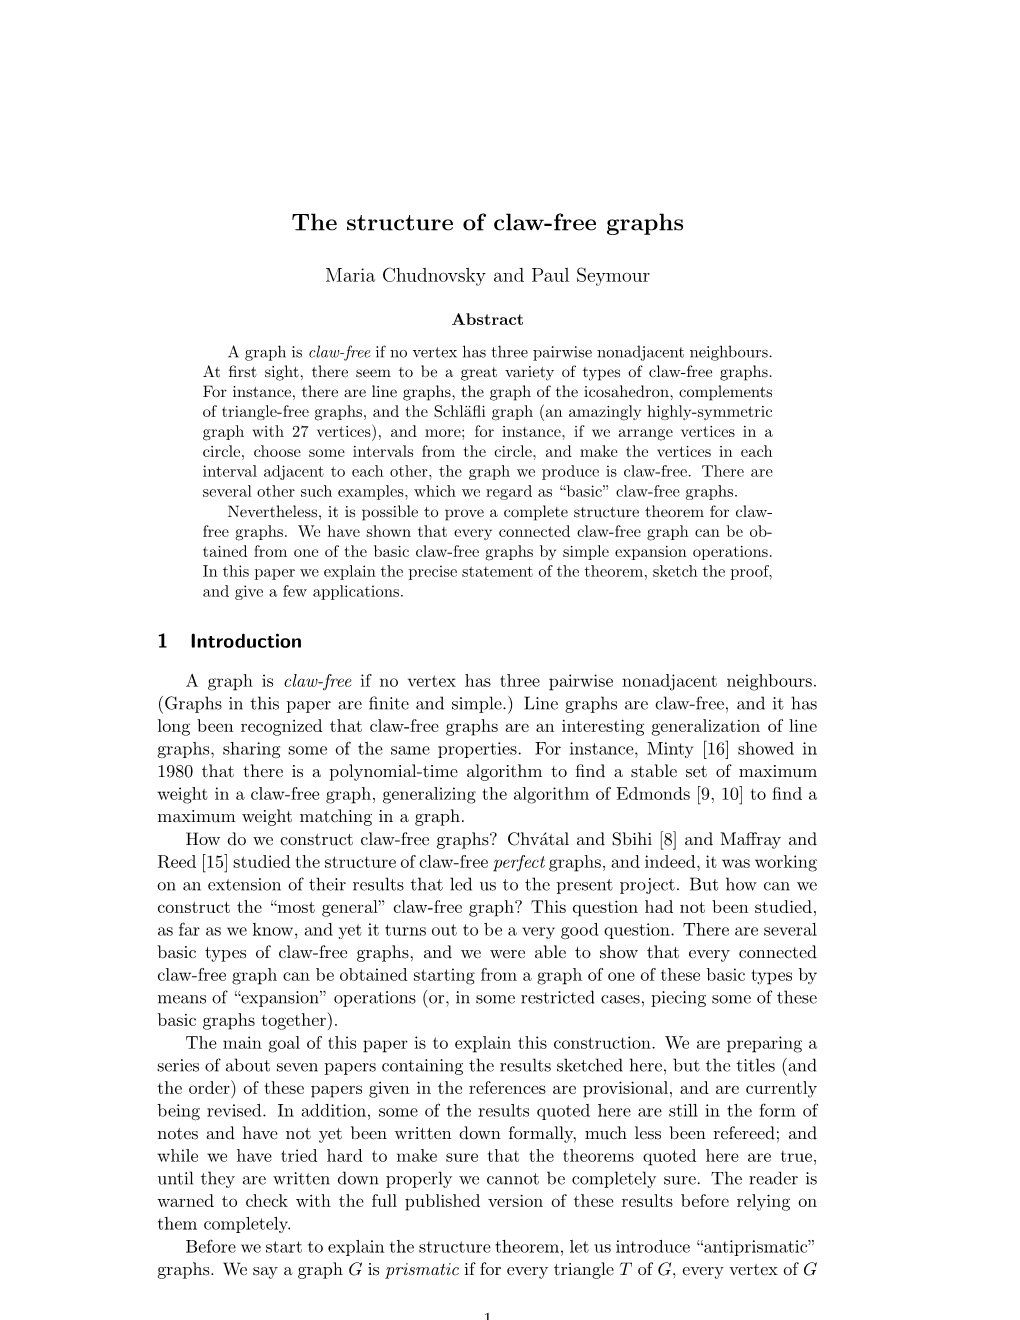 The Structure of Claw-Free Graphs